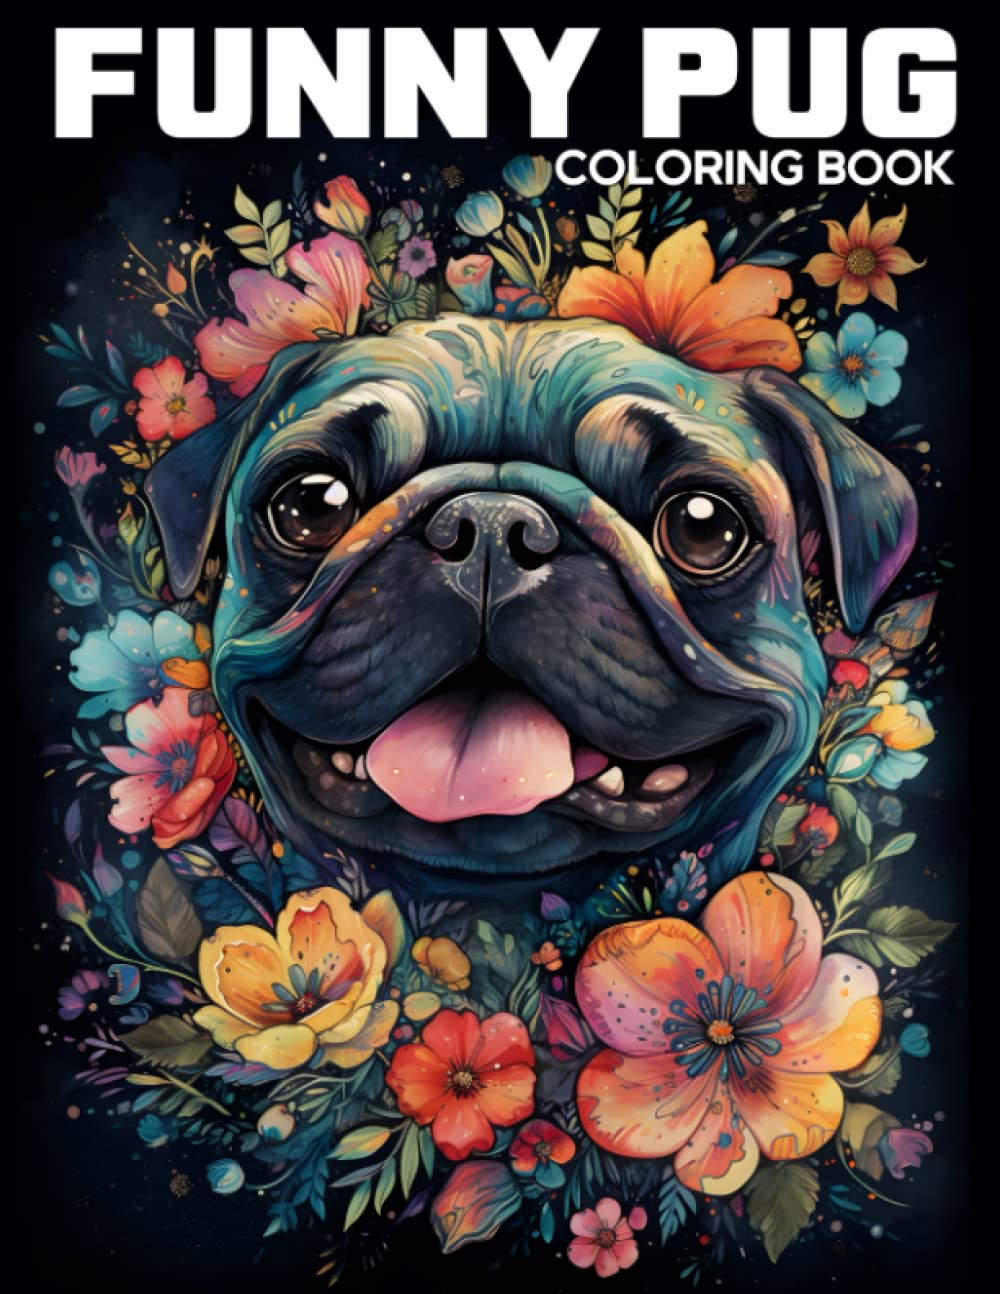 A Hilarious Fun Adorable Pug Dog Coloring Books For Adults With Funny Quotes